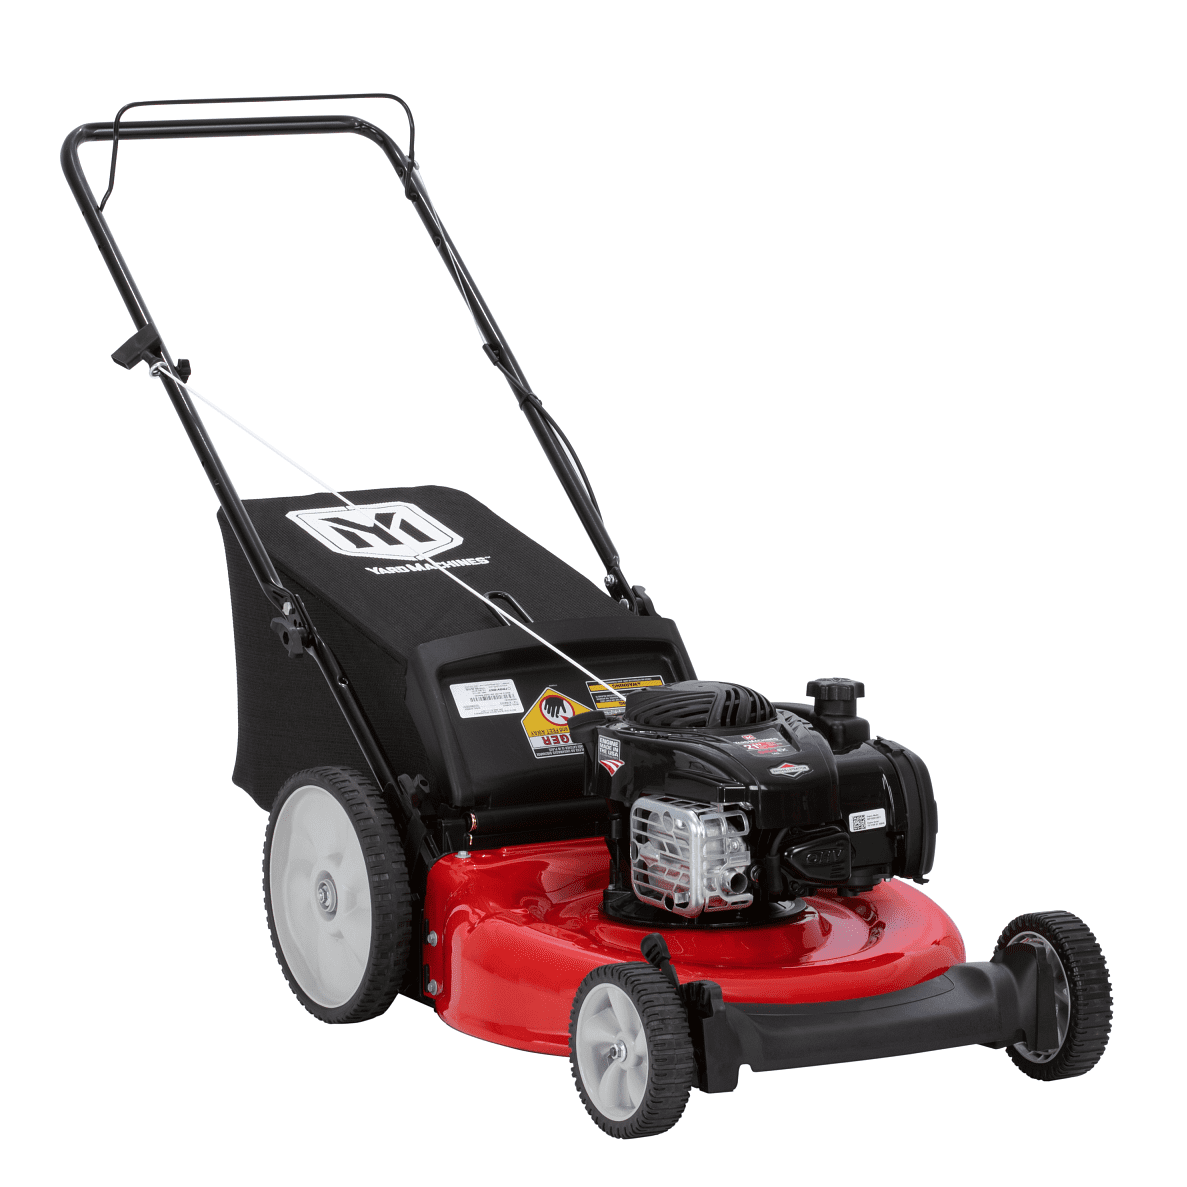 Details about   Push Lawn Mower 170 21" Gas 2-in-1 Walk Behind Compact Ideal for Small Yard 